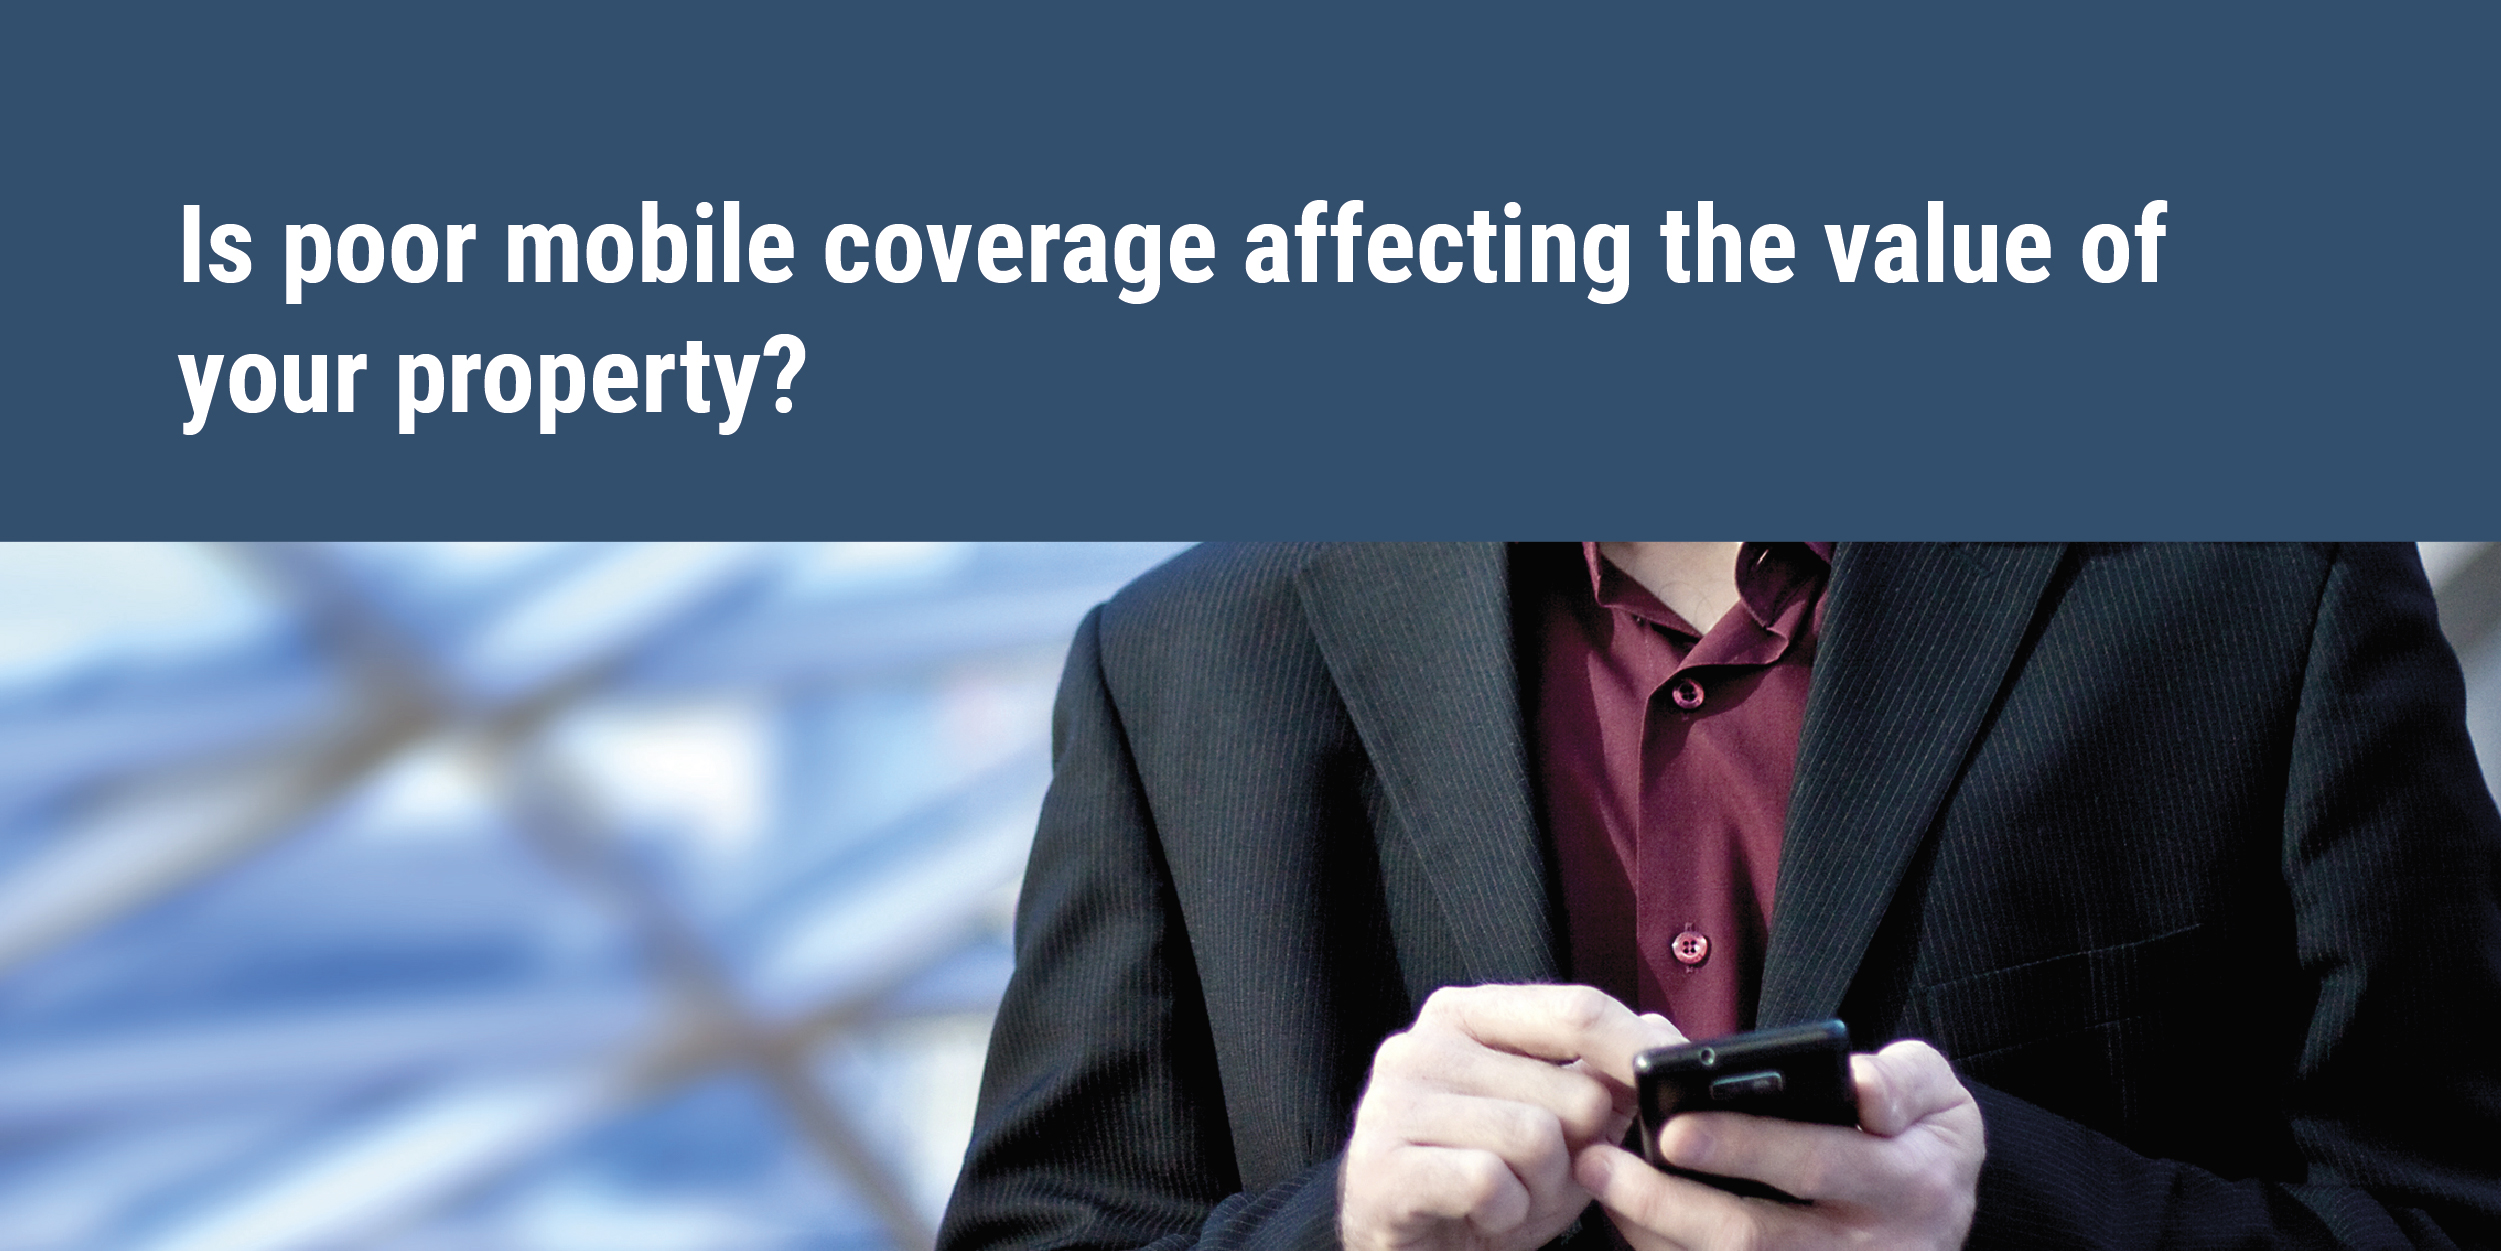 Is poor mobile coverage affecting the value of your property? Unreliable mobile network coverage is irritating and disruptive.